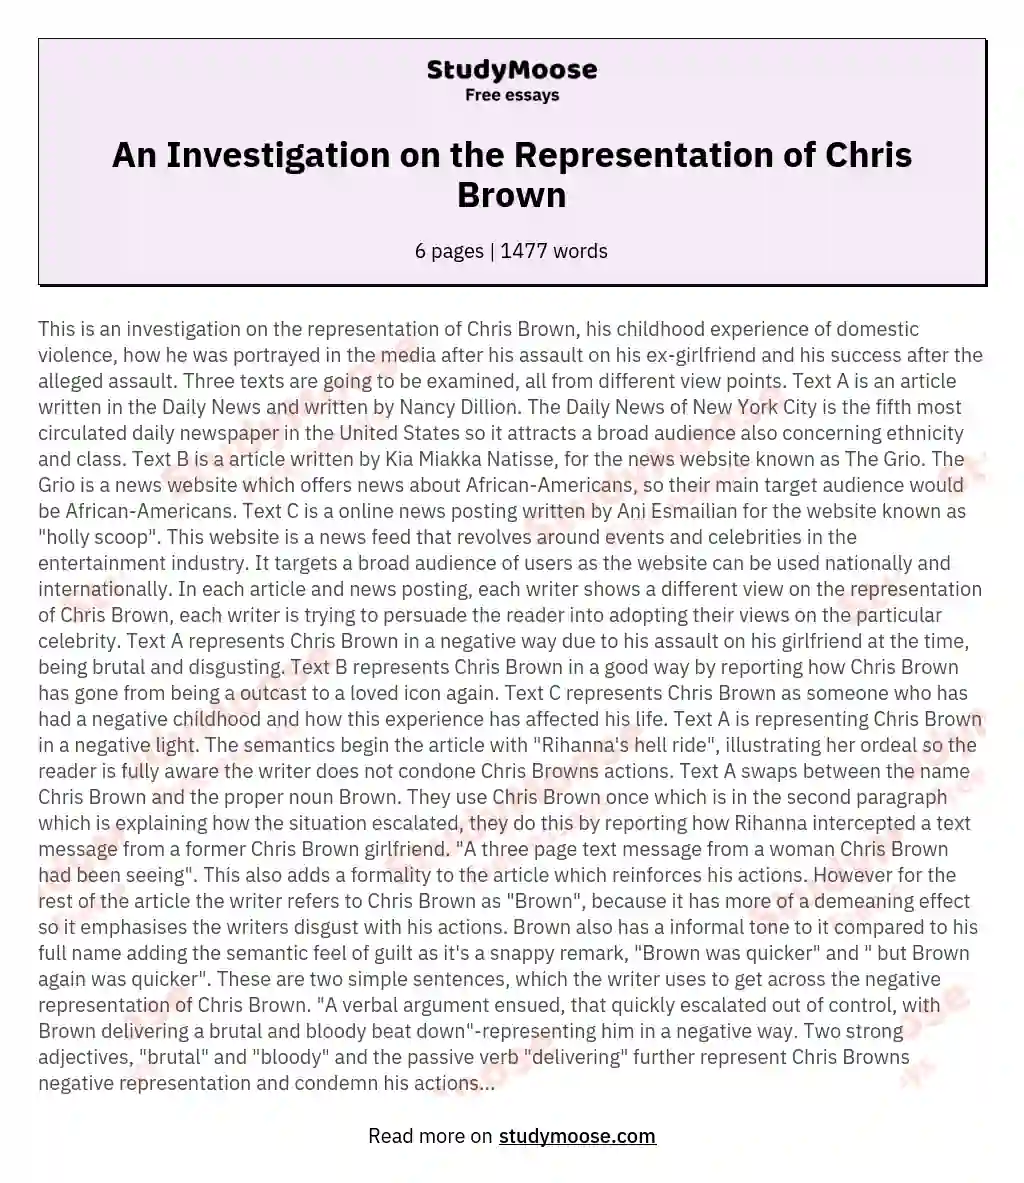 An Investigation on the Representation of Chris Brown essay